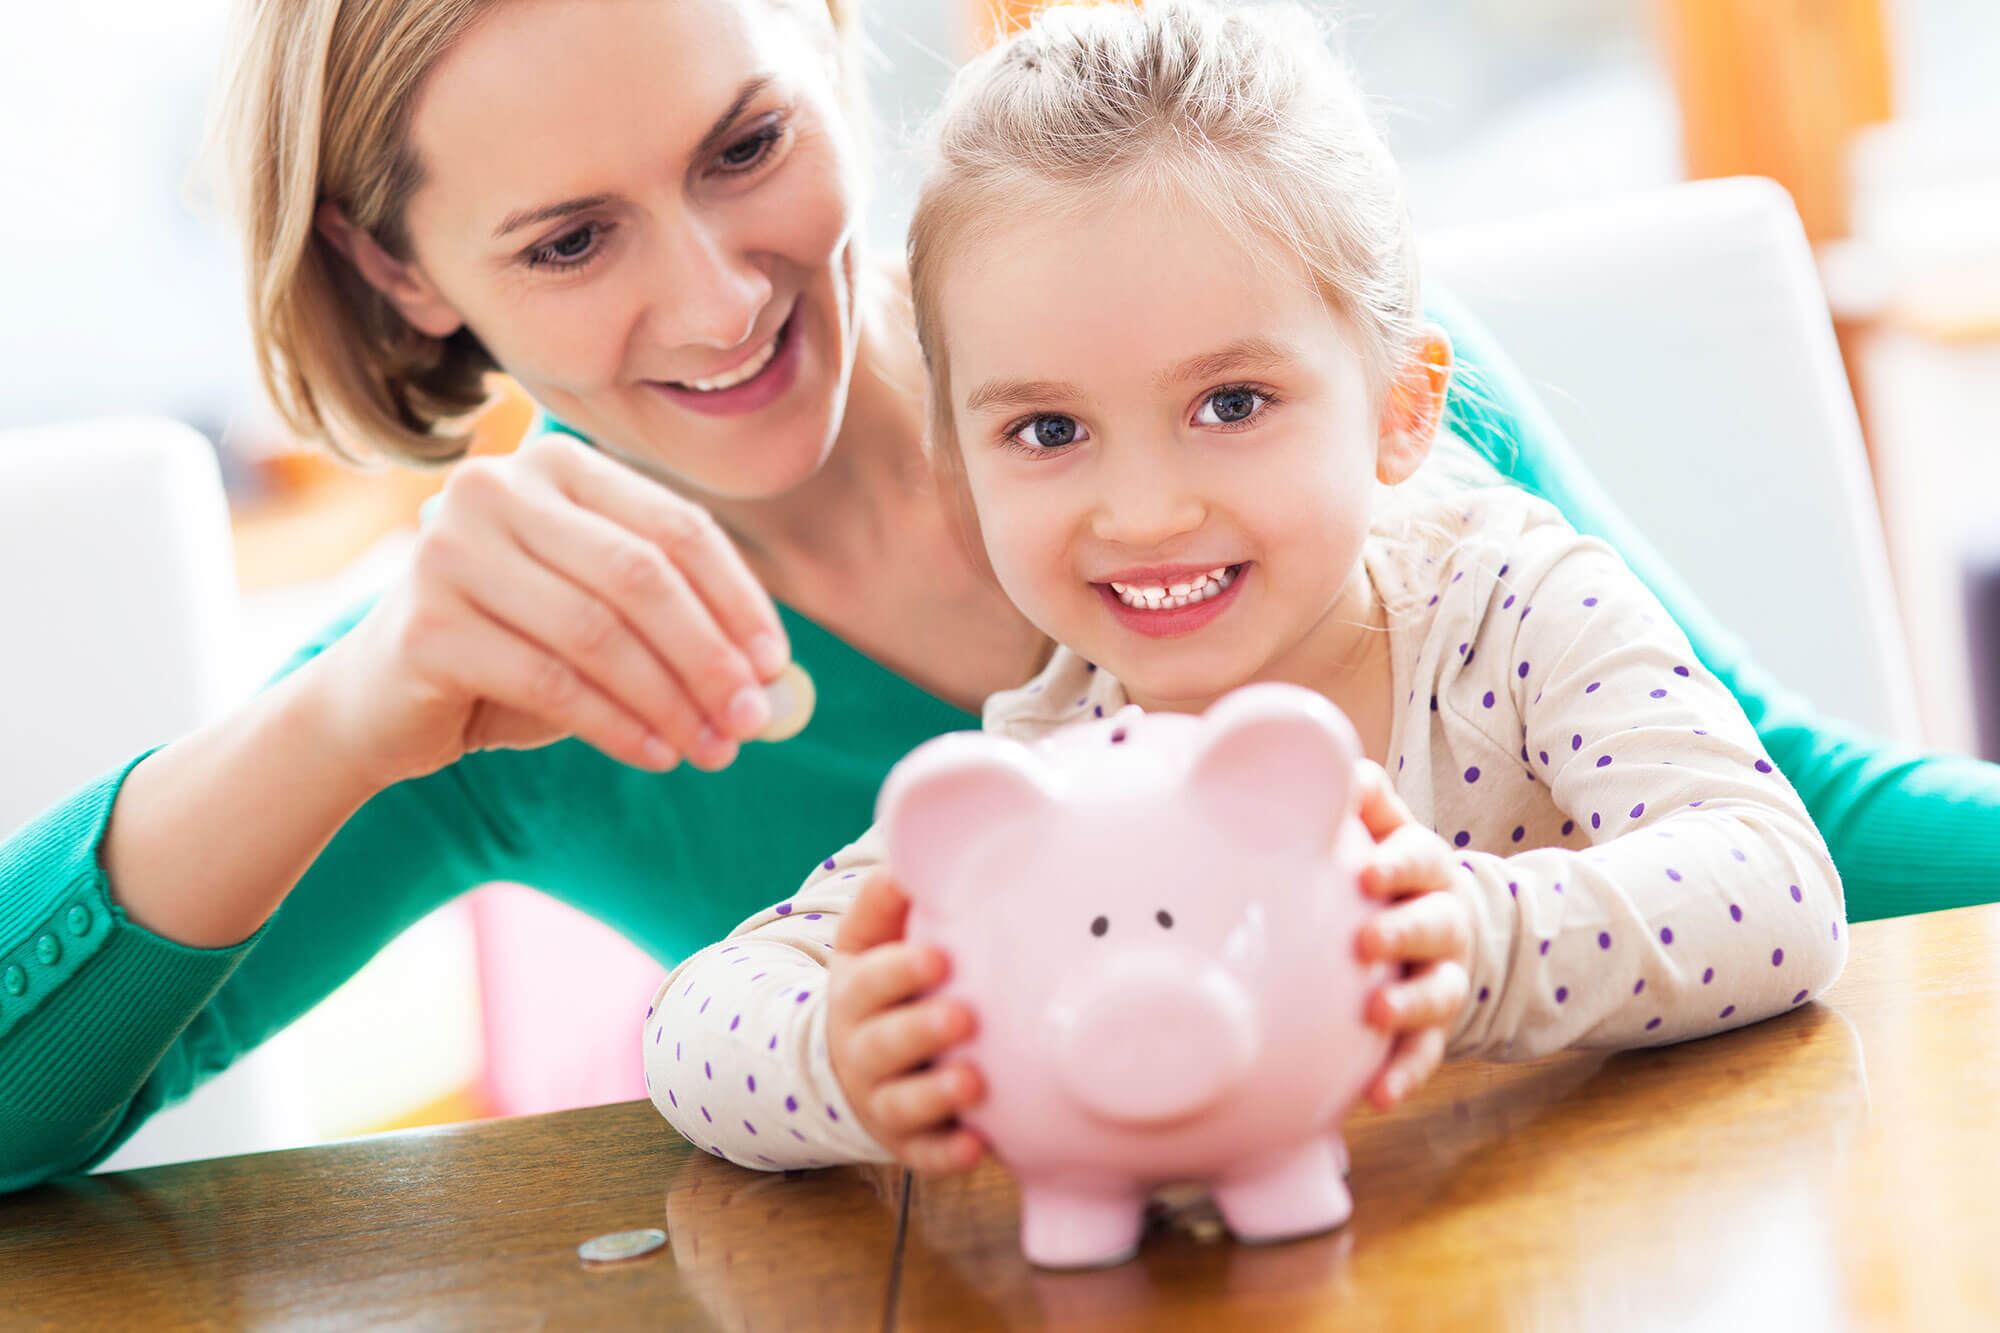 Photo of a Small Child and Woman putting coins into a Piggy Bank